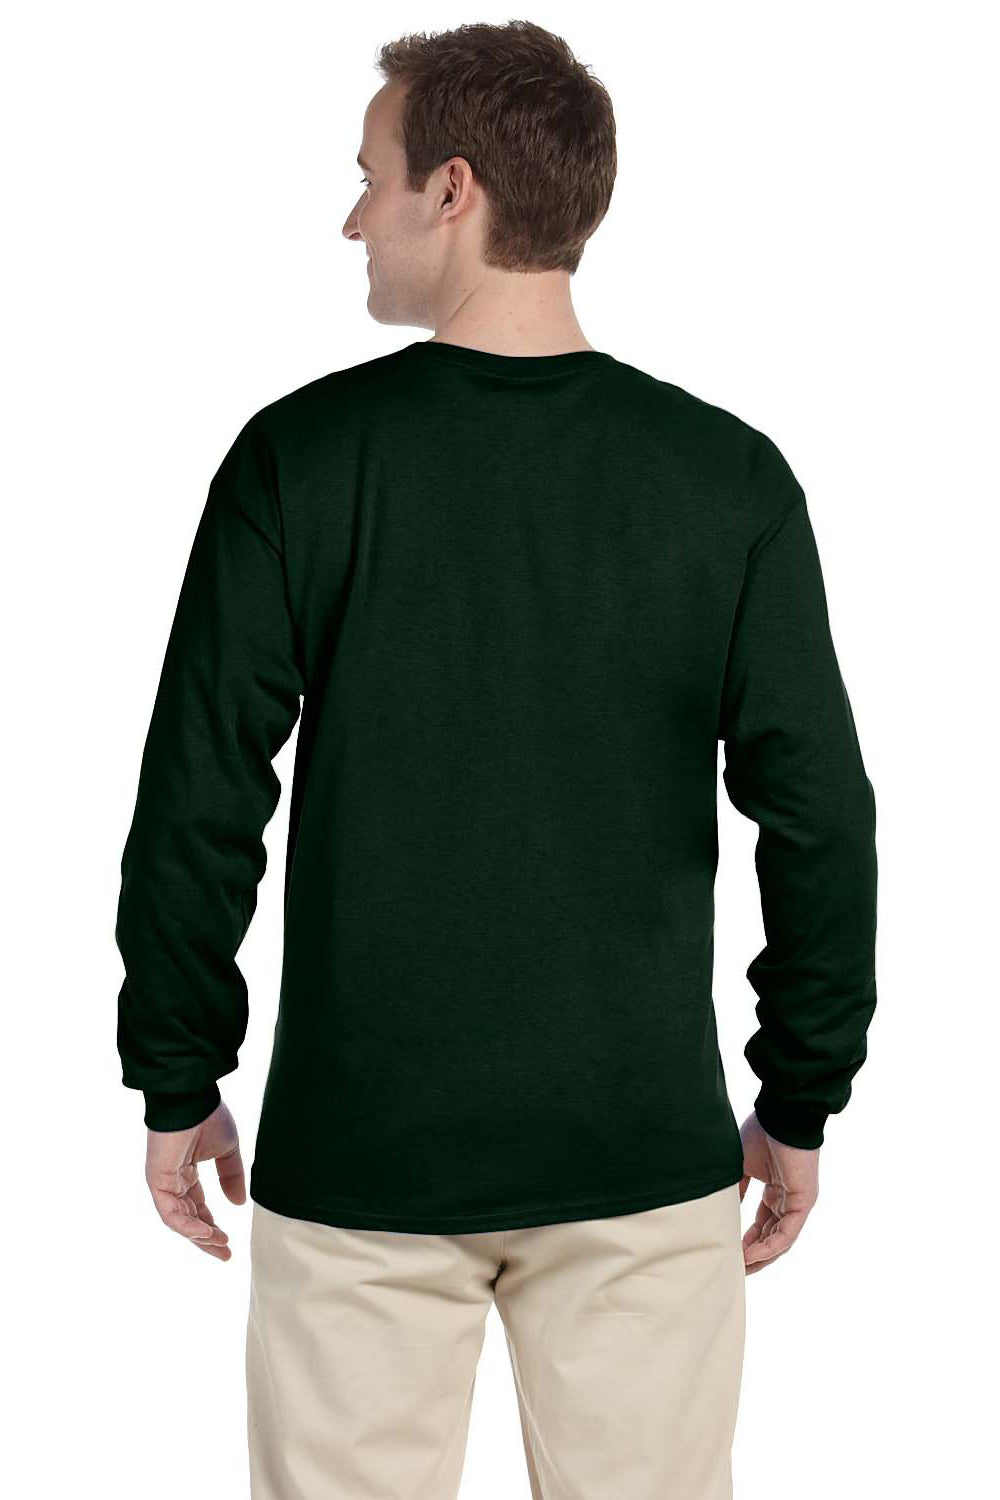 Fruit Of The Loom 4930 Mens HD Jersey Long Sleeve Crewneck T-Shirt Forest Green Back